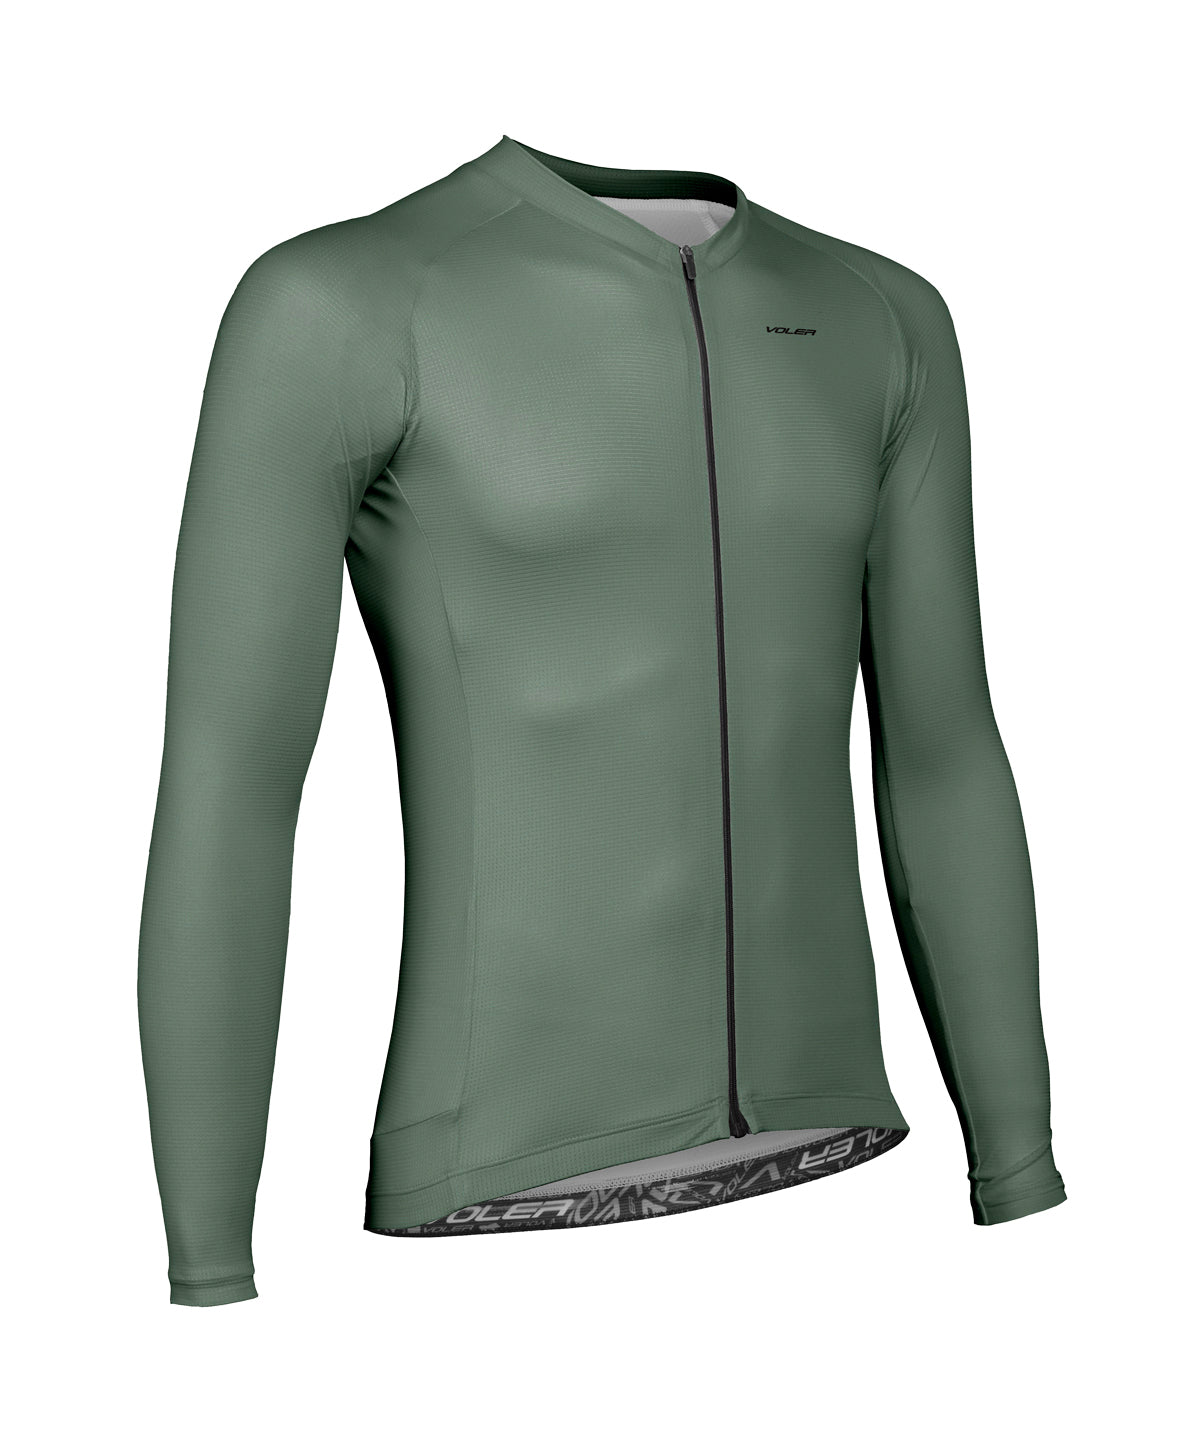 M. VELOCITY AIR LS JERSEY - SOLID